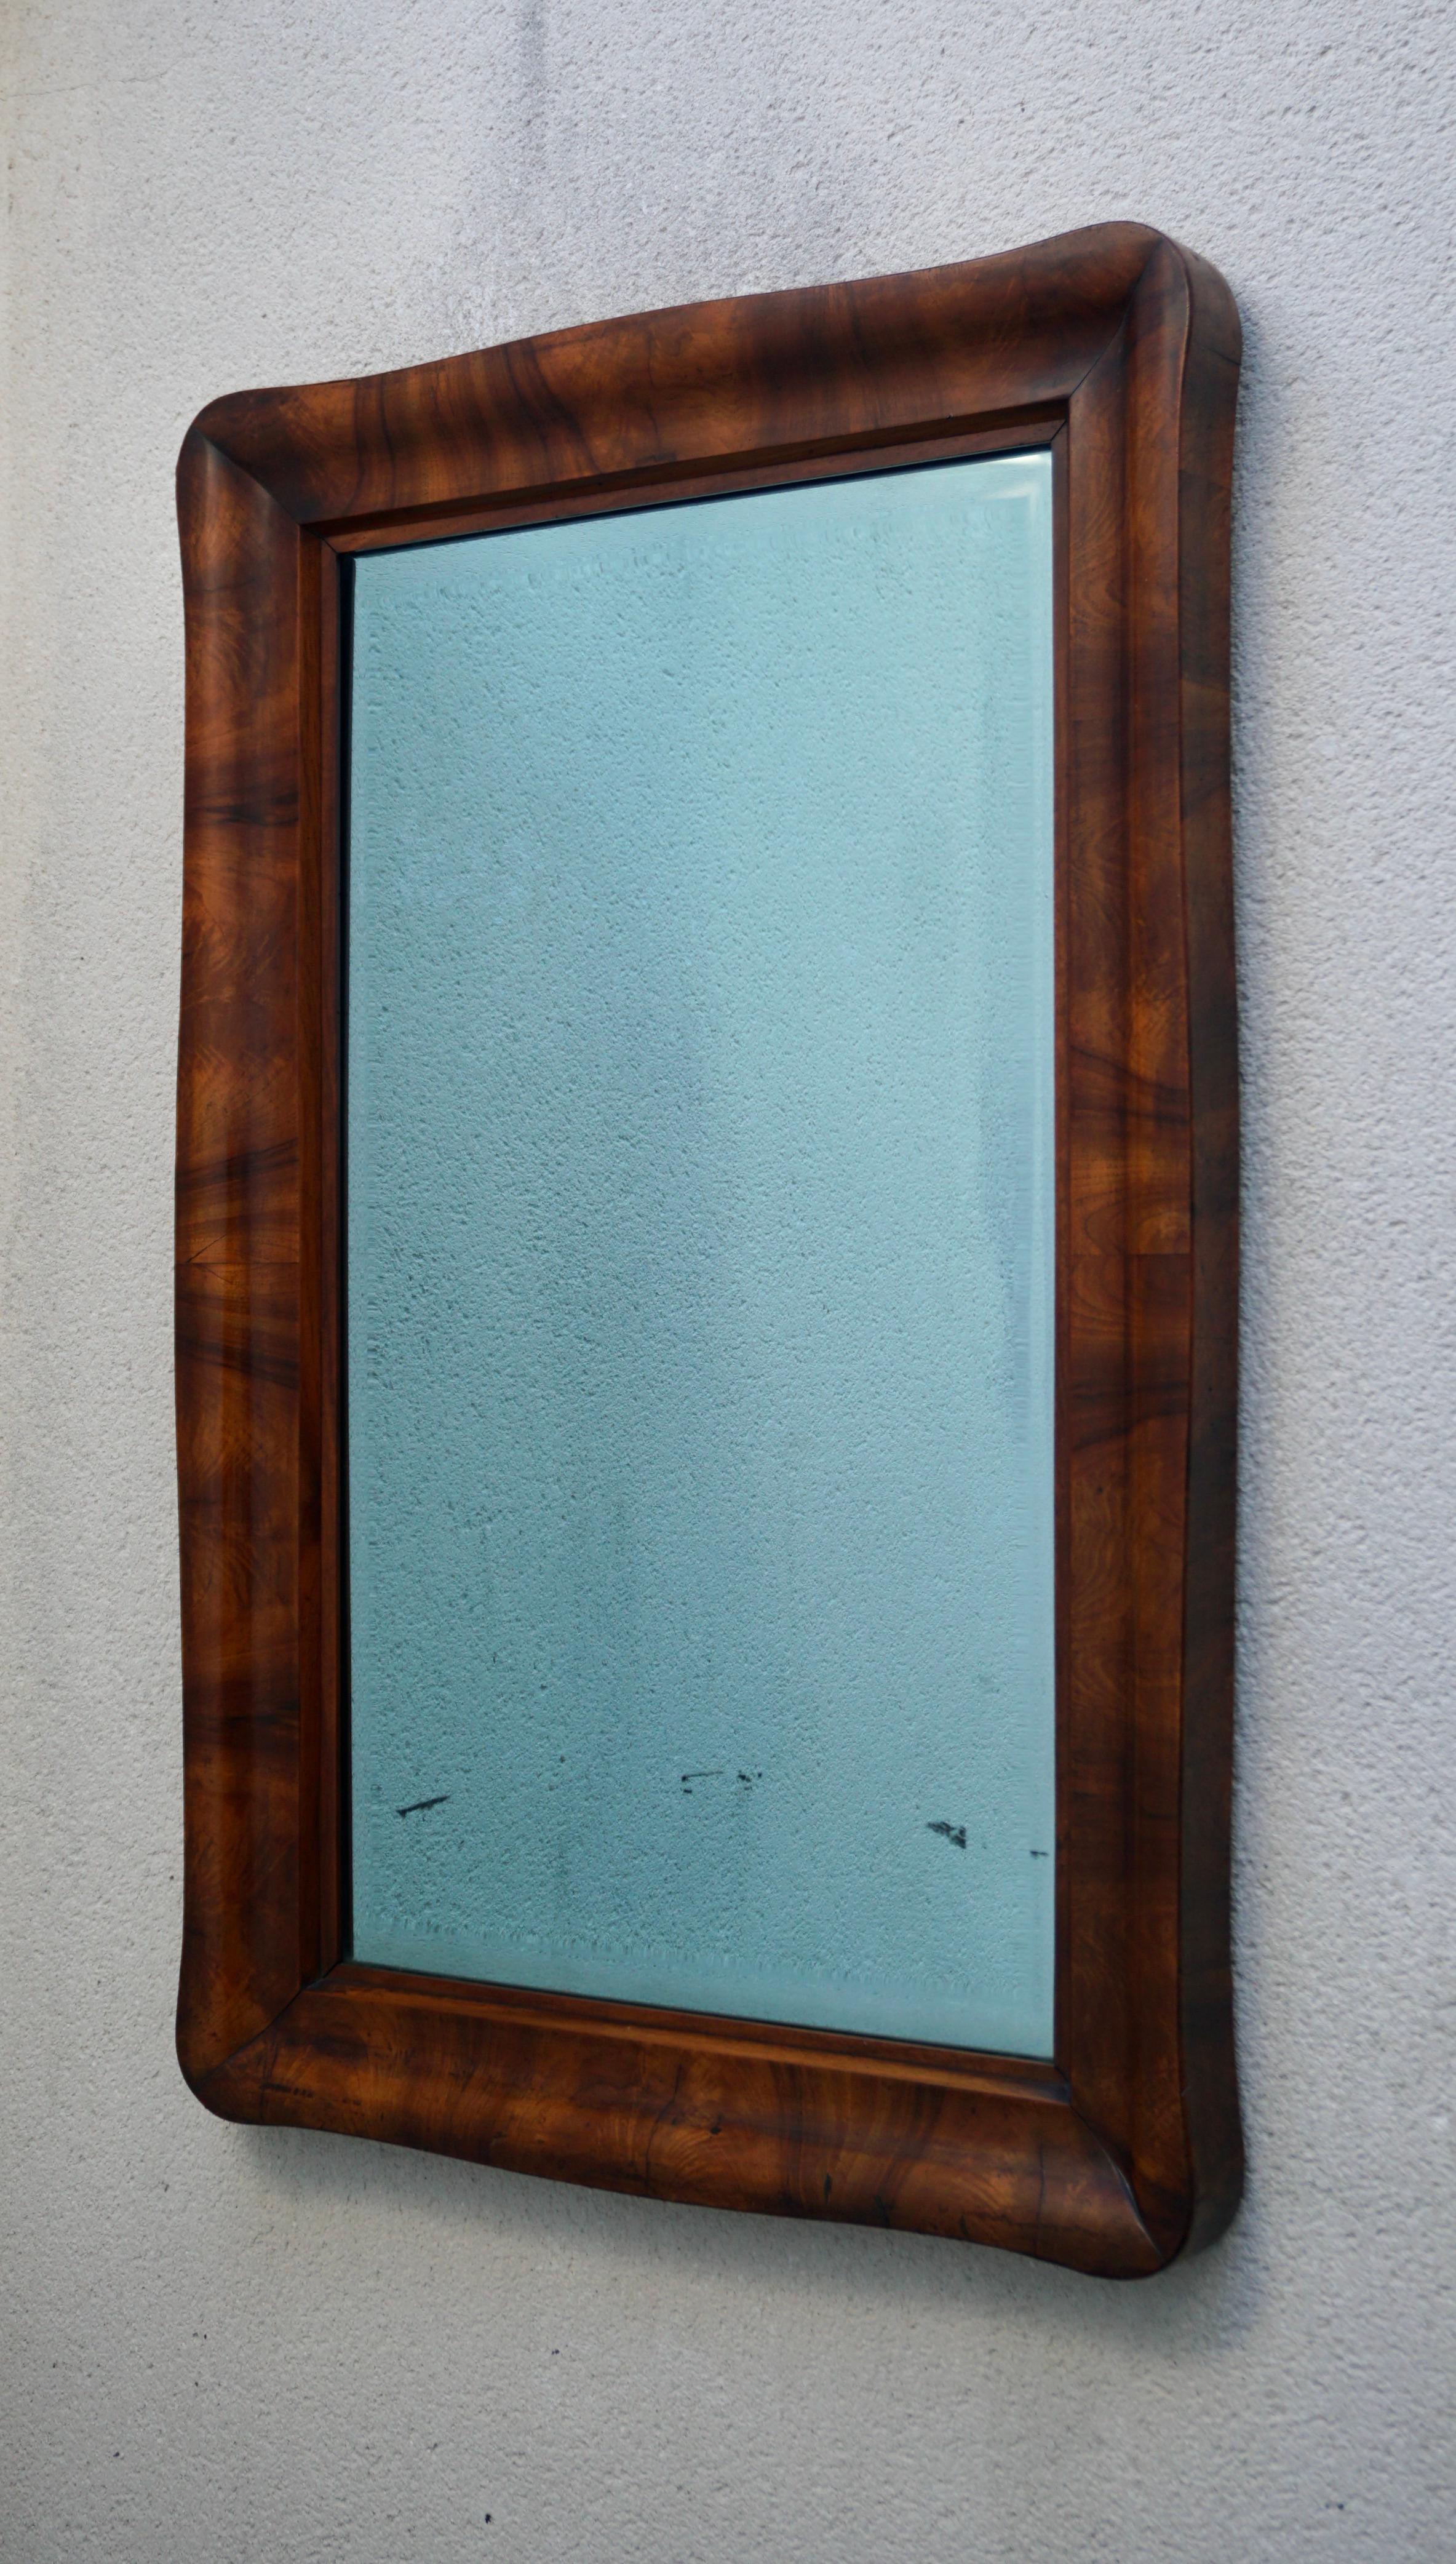 A mahogany veneer 19th century mirror (102 x 66 cm) with old glass.